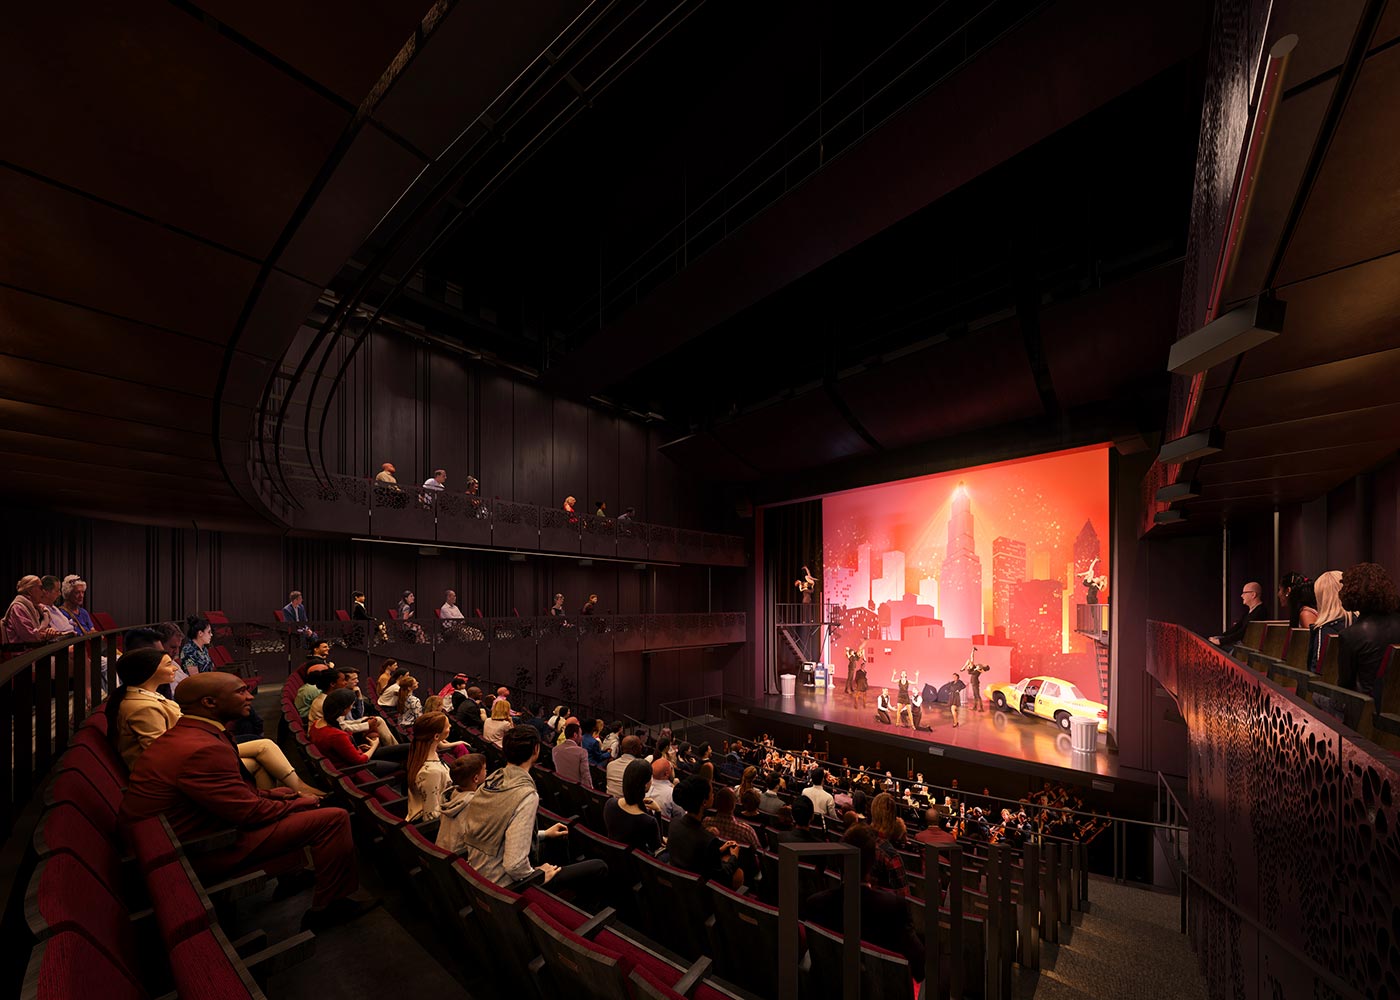 <p>The 350-seat theater is NYU's first professional-level proscenium, fly-loft theatre for student productions. <small>Illustration by Brooklyn Digital Foundry</small></p>